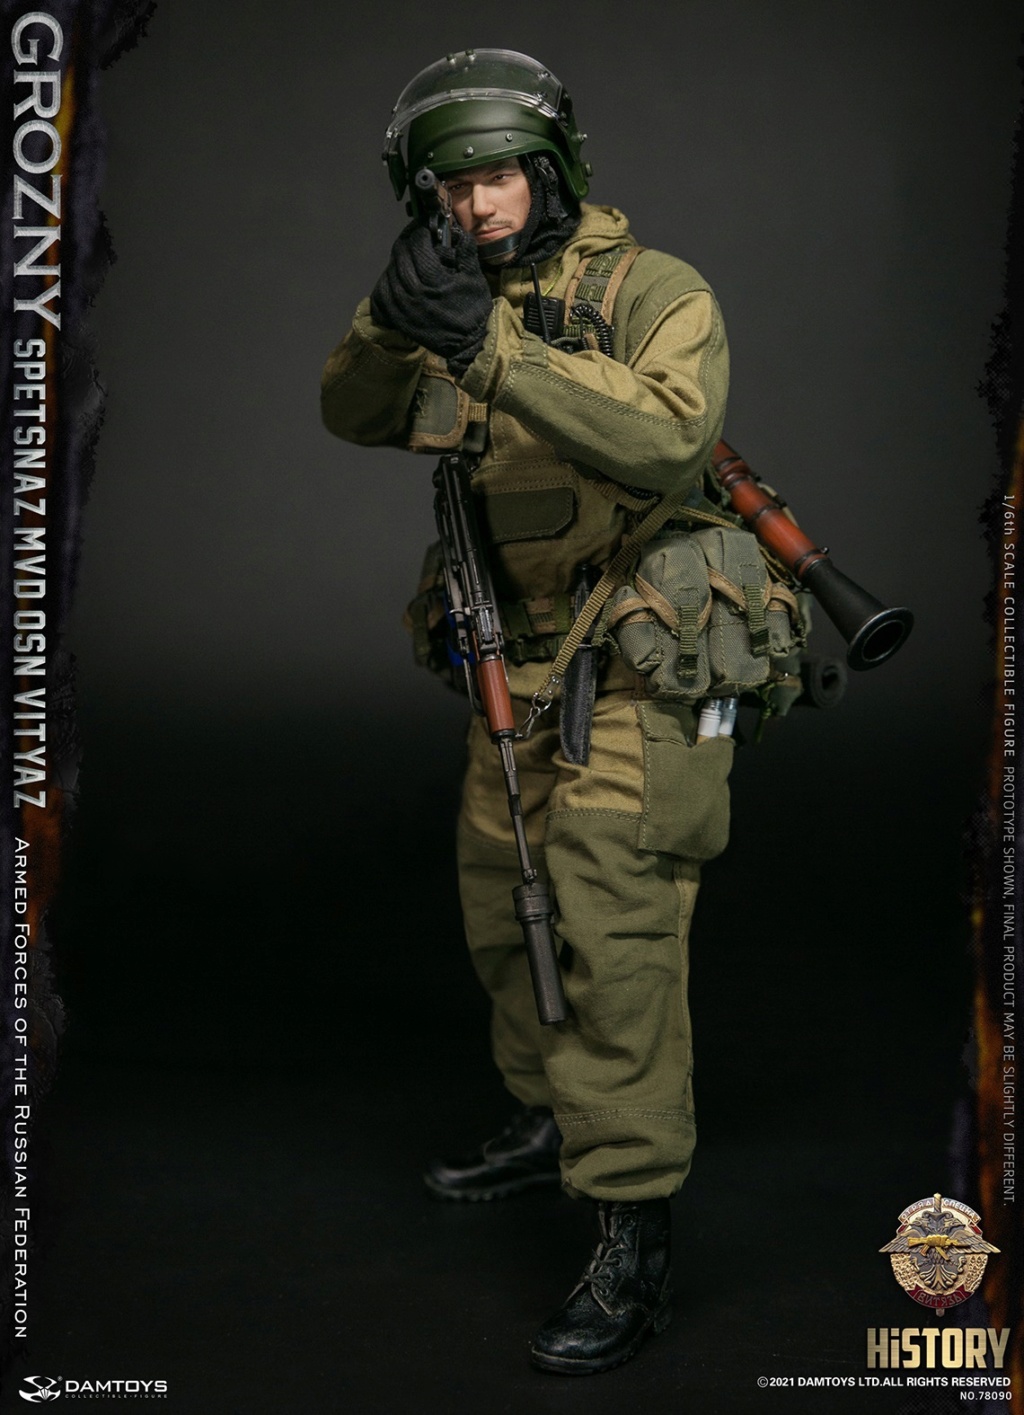 russian - NEW PRODUCT: DAMTOYS: 1/6 Russian In-Service Warrior Special Forces - Grozny s78090 13571710